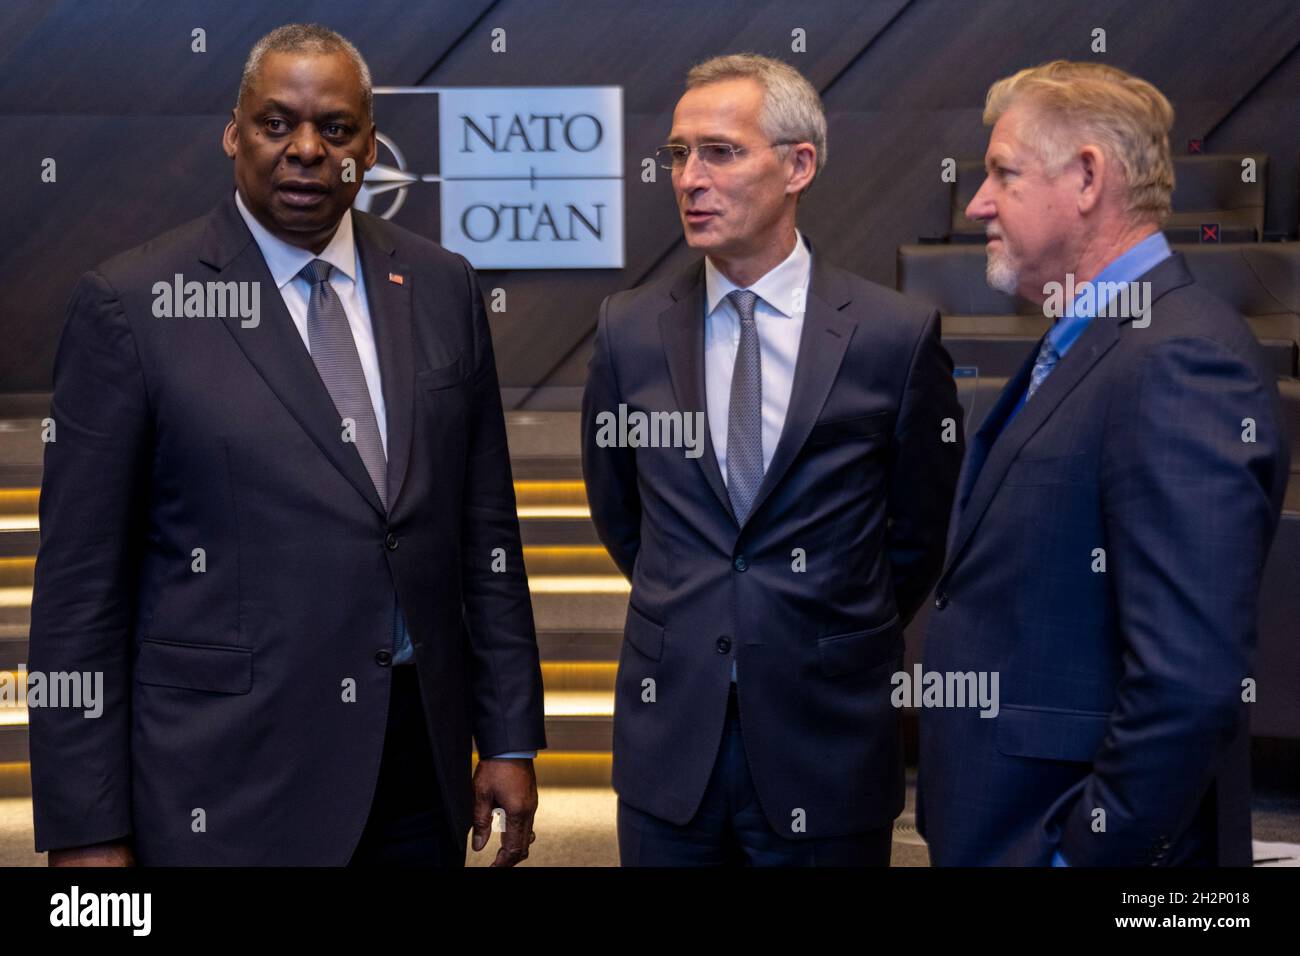 Brussels, Belgium. 22 October, 2021. U.S. Secretary of Defense Lloyd J. Austin III, chats with NATO Secretary General Jens Stoltenberg and John Manza, NATO Assistant Secretary General for Operations, right, before the start of the NATO defense ministerial meeting October 22, 2021 in Brussels, Belgium.  Credit: Chad McNeeley/DOD/Alamy Live News Stock Photo